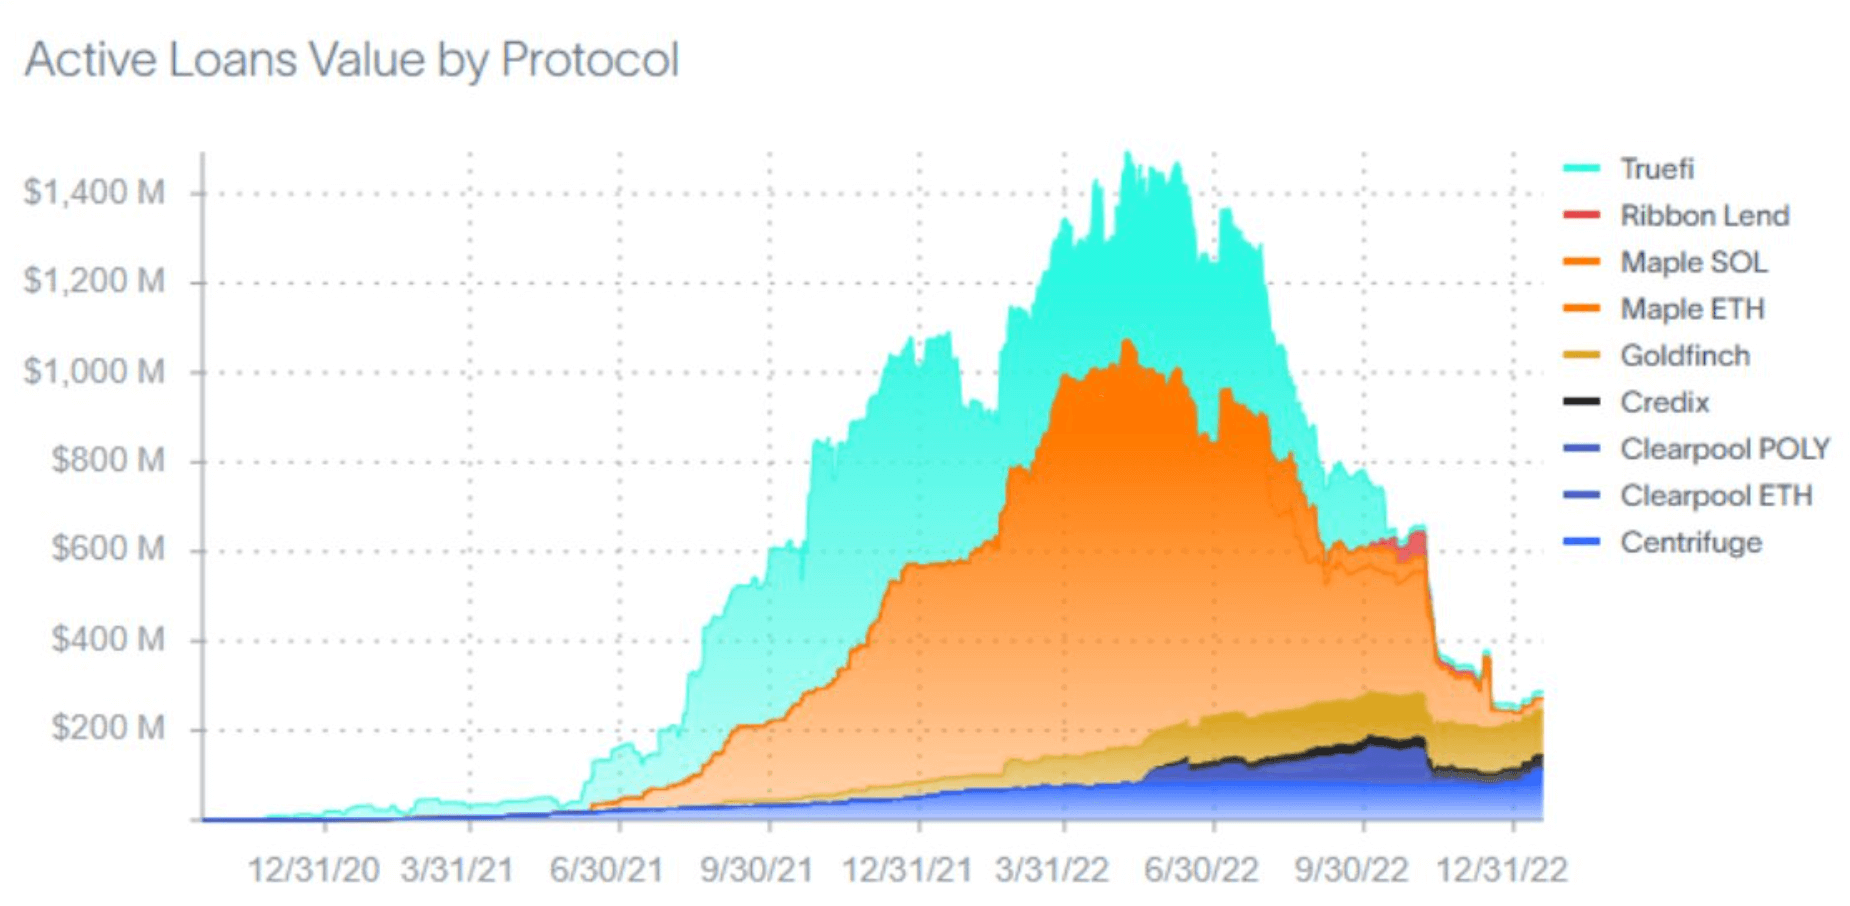 Active loans value by Protocol